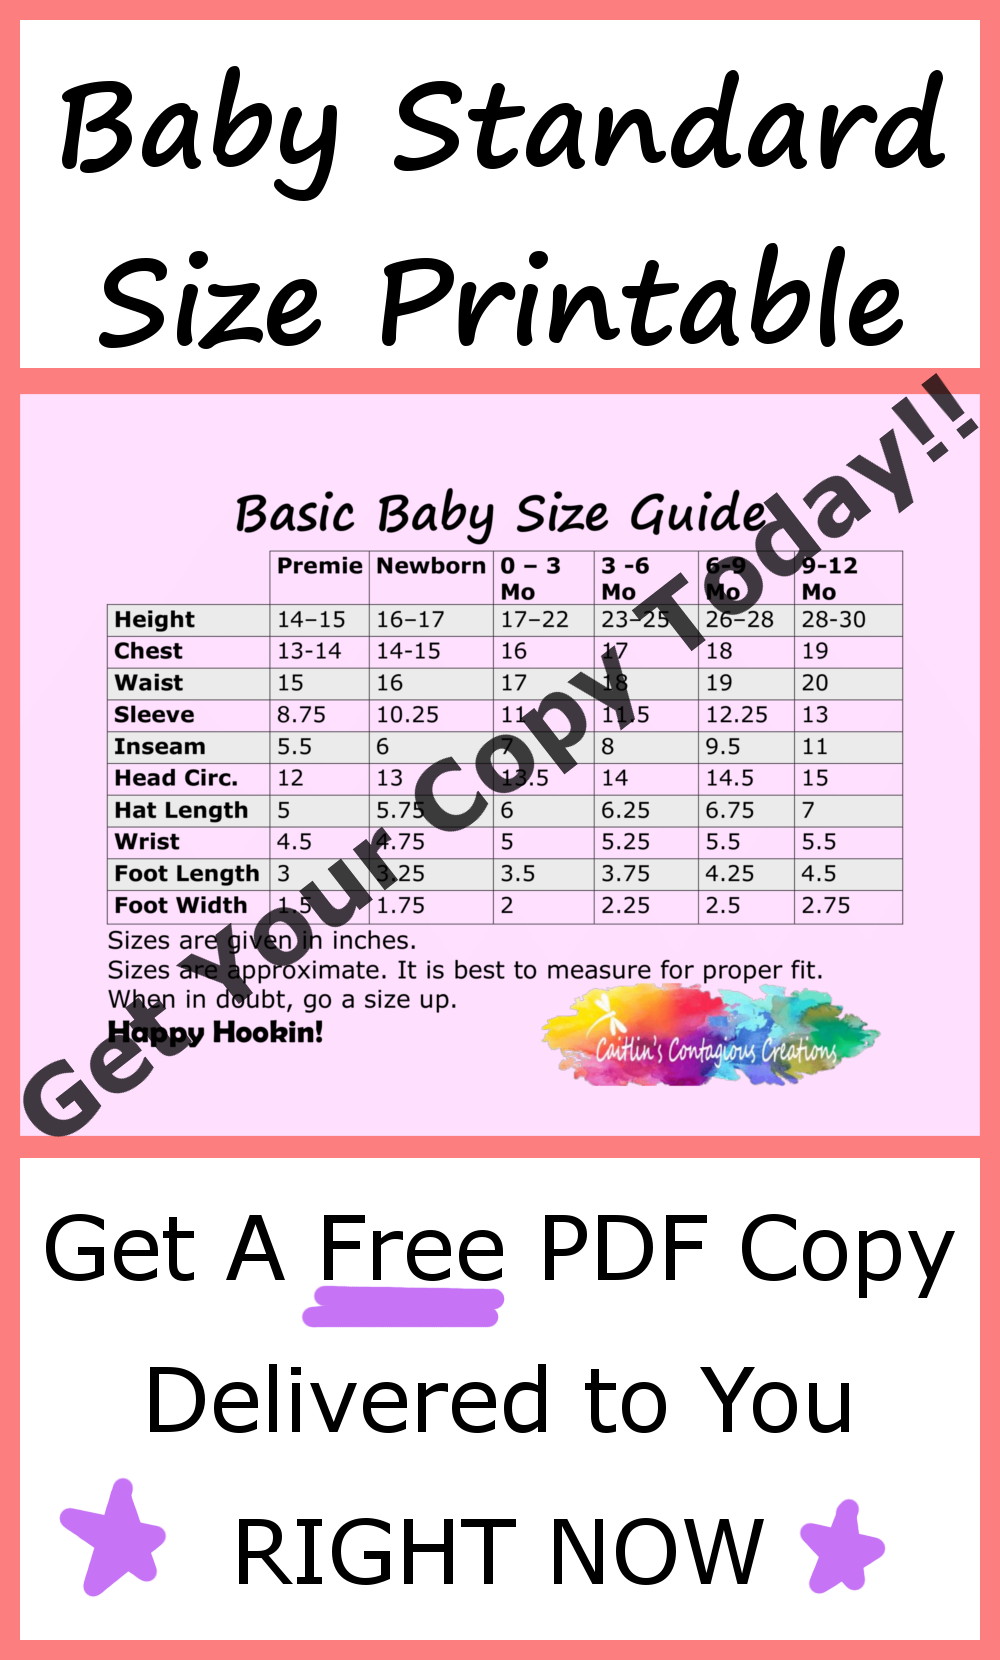 Get a free PDF copy of this baby size guide delivered to your inbox now